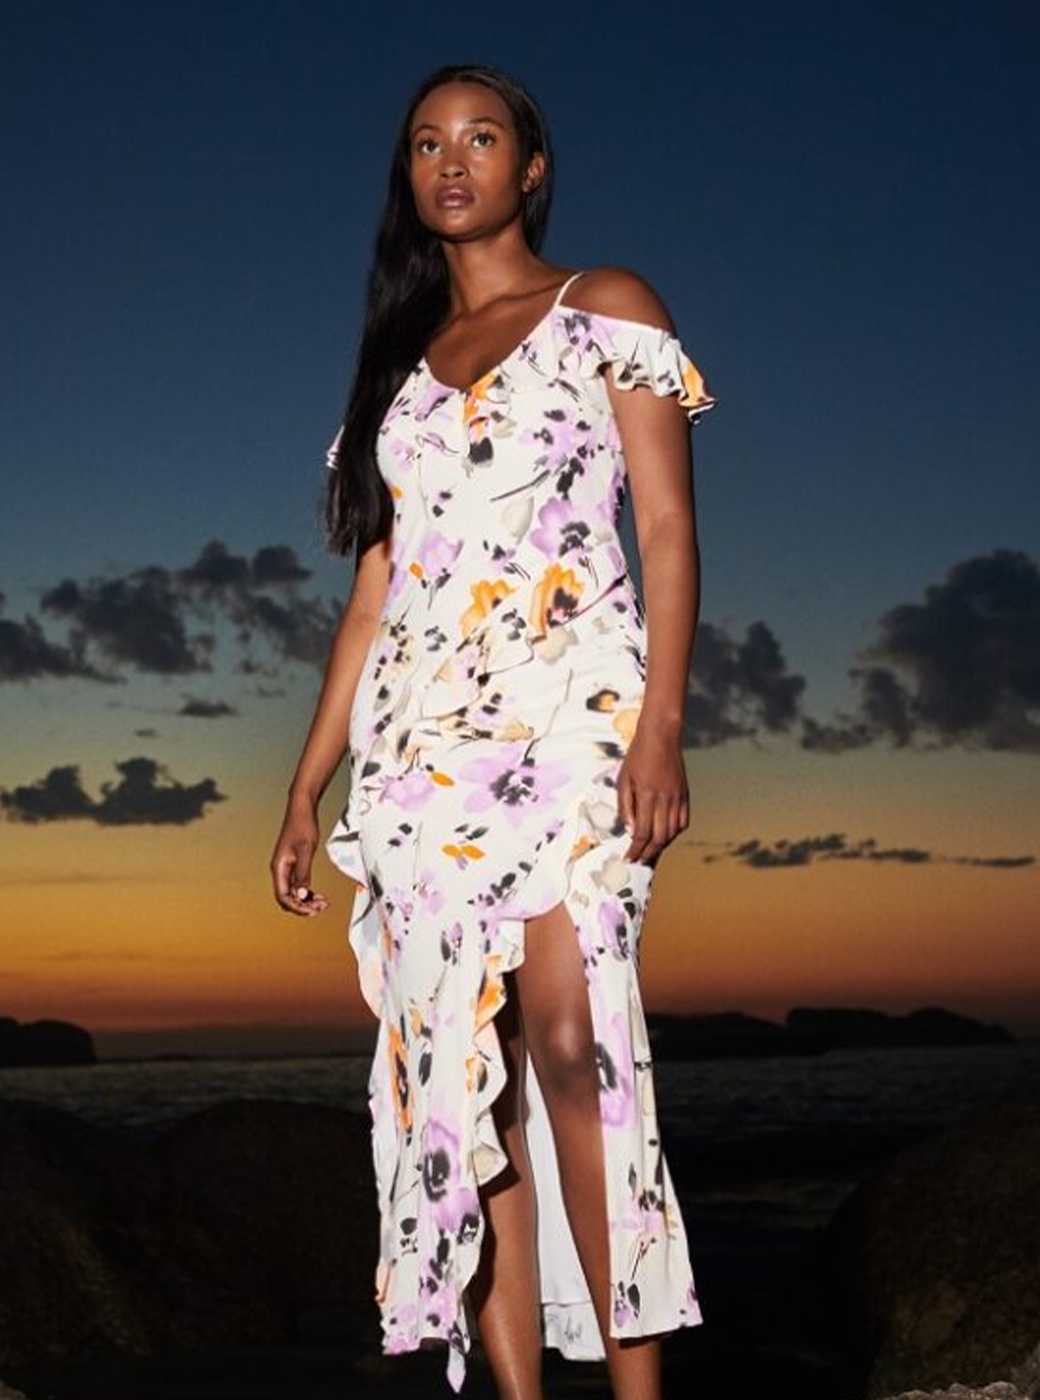 Statement dresses. Right back up in yo muthafuckin ass. Shop dem hoes's dresses.